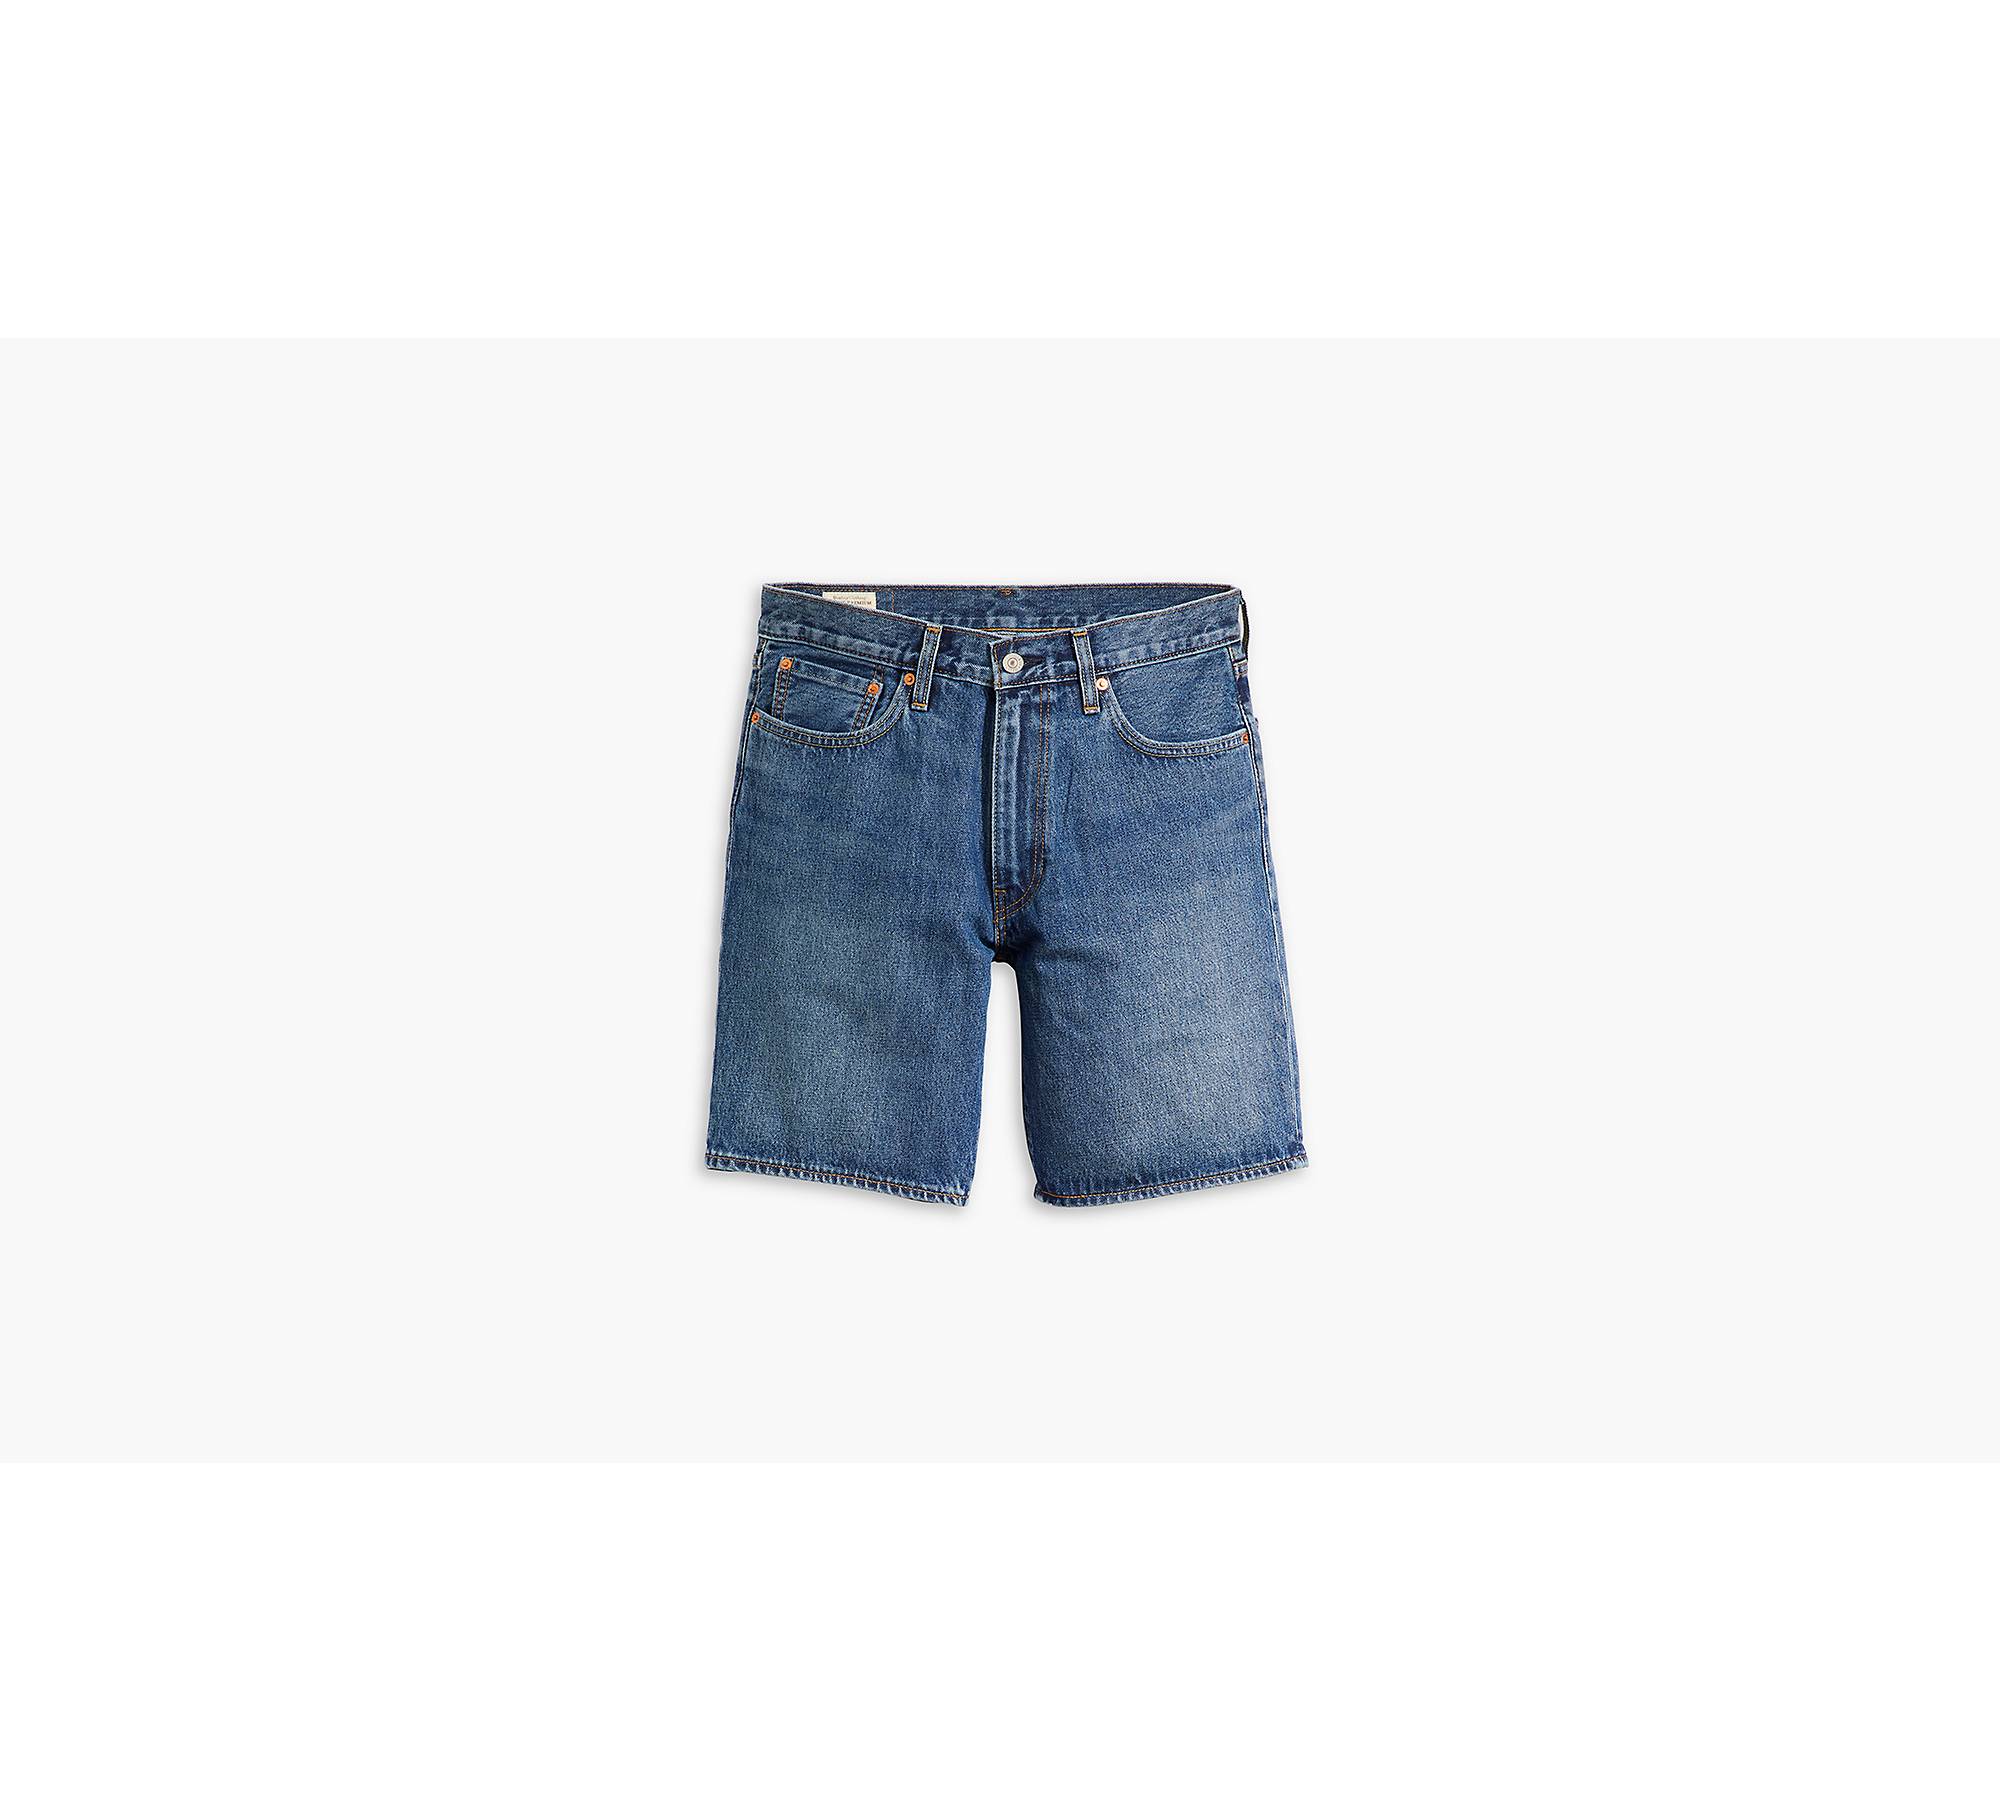 468™ Stay Loose Shorts - Blue | Levi's® GB